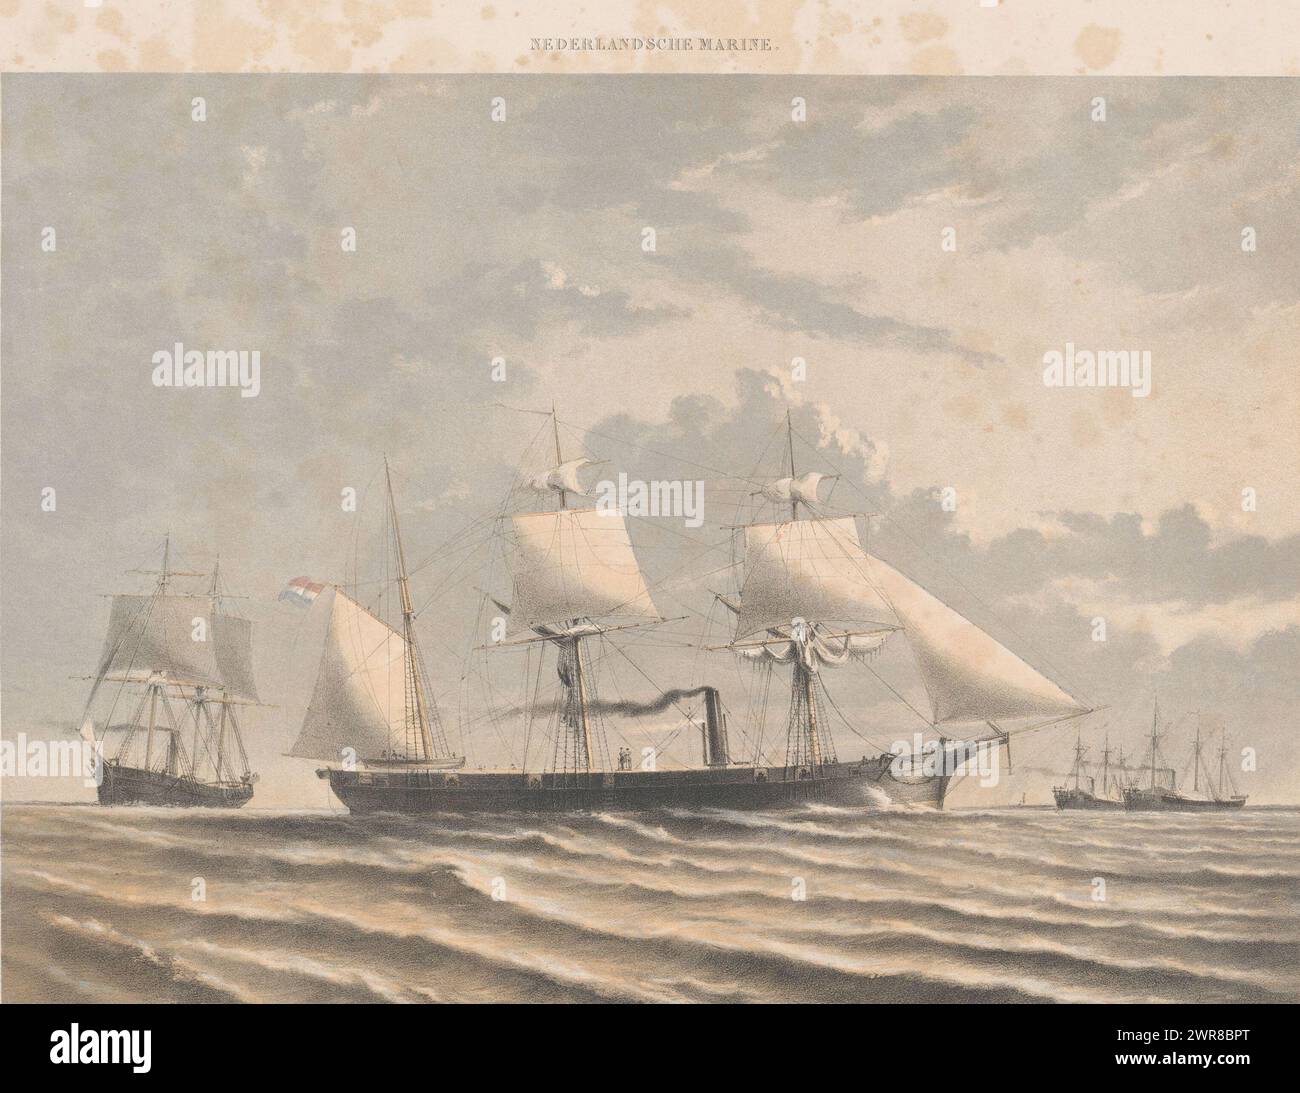 Screw steam ship 4th class (title on object), View of four ships, two of which with hoisted sails., print maker: Gerard Voorduin, after design by: Gerard Voorduin, printer: Samuel Lankhout, print maker: The Hague, after design by: The Hague, printer: The Hague, publisher: Rotterdam, 1866, paper, height 450 mm × width 620 mm, print Stock Photo